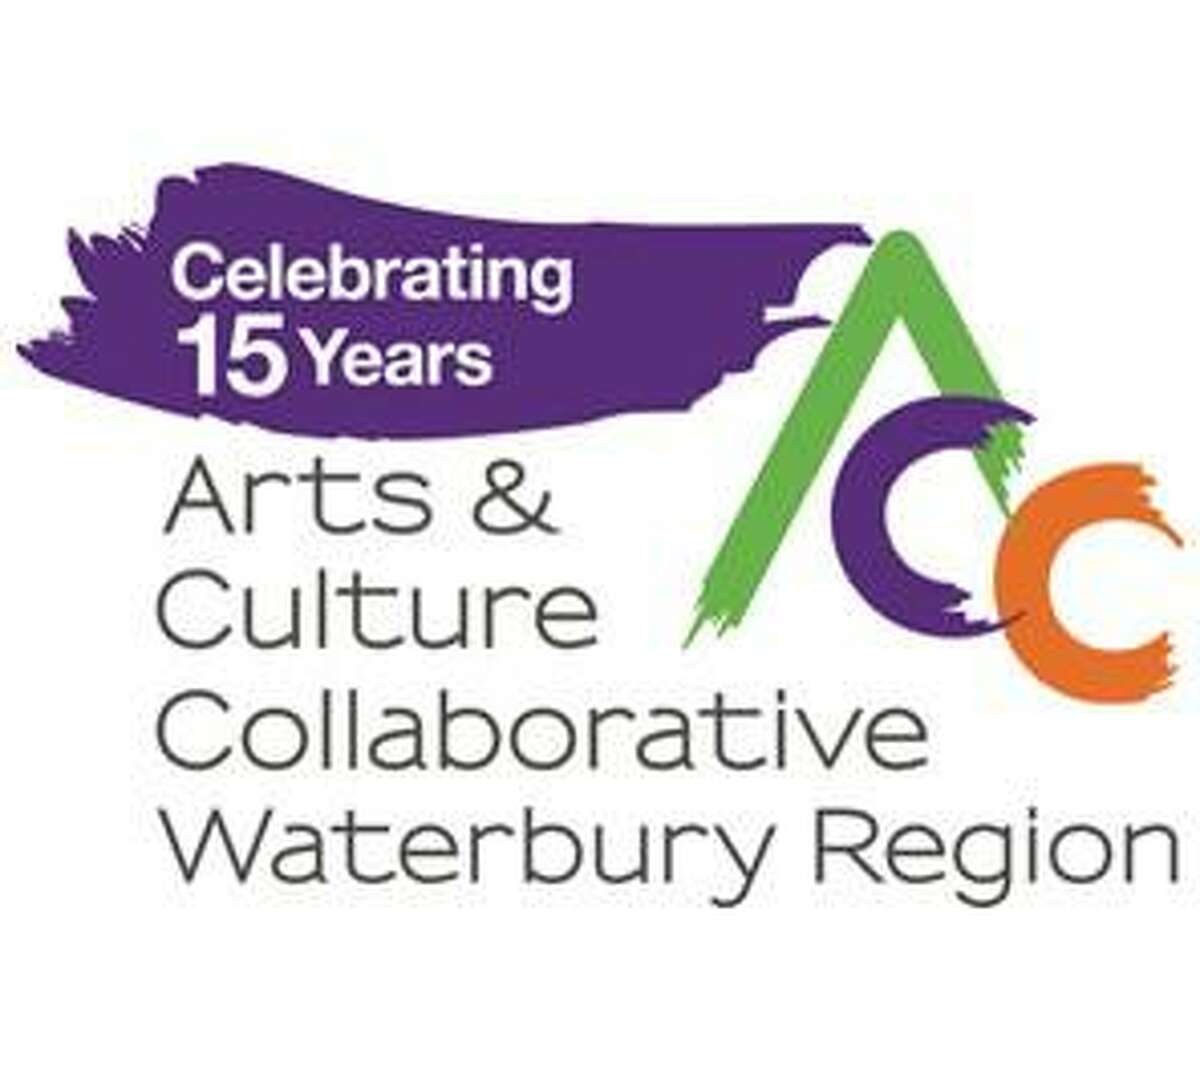 The Arts & Culture Collaborative, Waterbury Region, is presenting a day-long interactive experience called, “The Healing Nature of Art” Sept. 9.